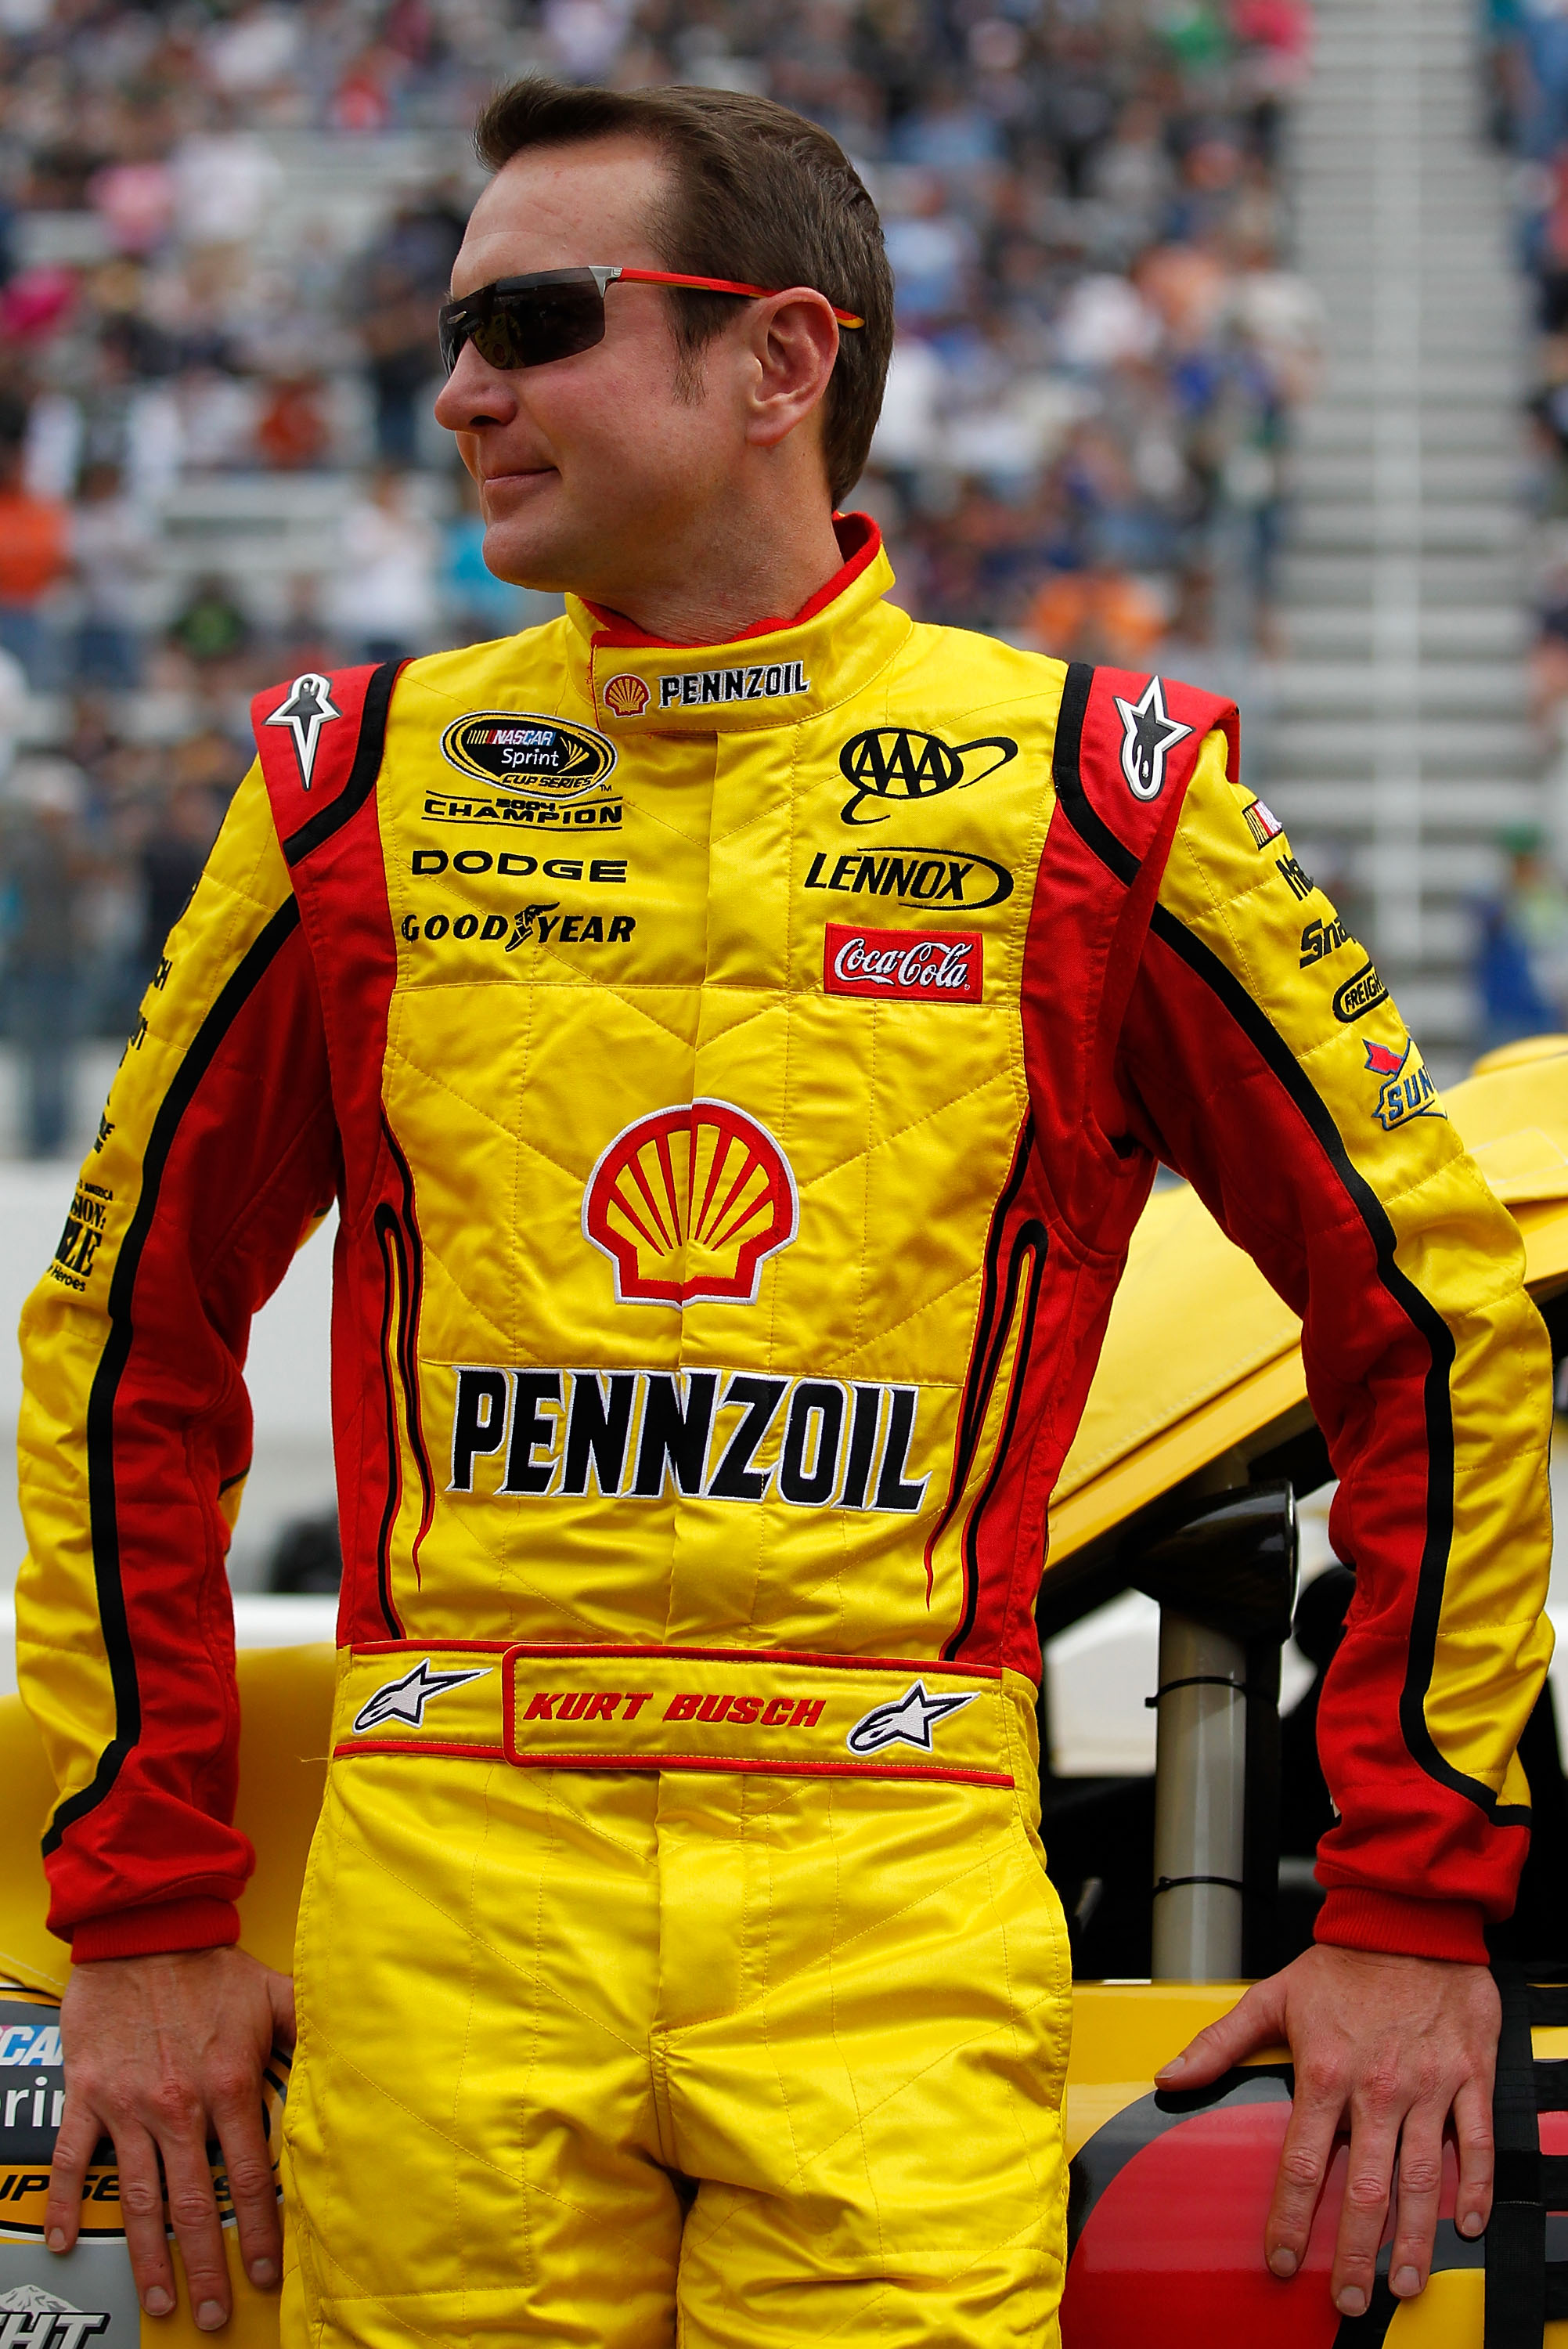 BRISTOL, TN - MARCH 20: Kurt Busch, driver of the #22 Shell/Pennzoil Dodge, stands on the grid prior to the start of the NASCAR Sprint Cup Series Jeff Byrd 500 Presented By Food City at Bristol Motor Speedway on March 20, 2011 in Bristol, Tennessee.  (Pho